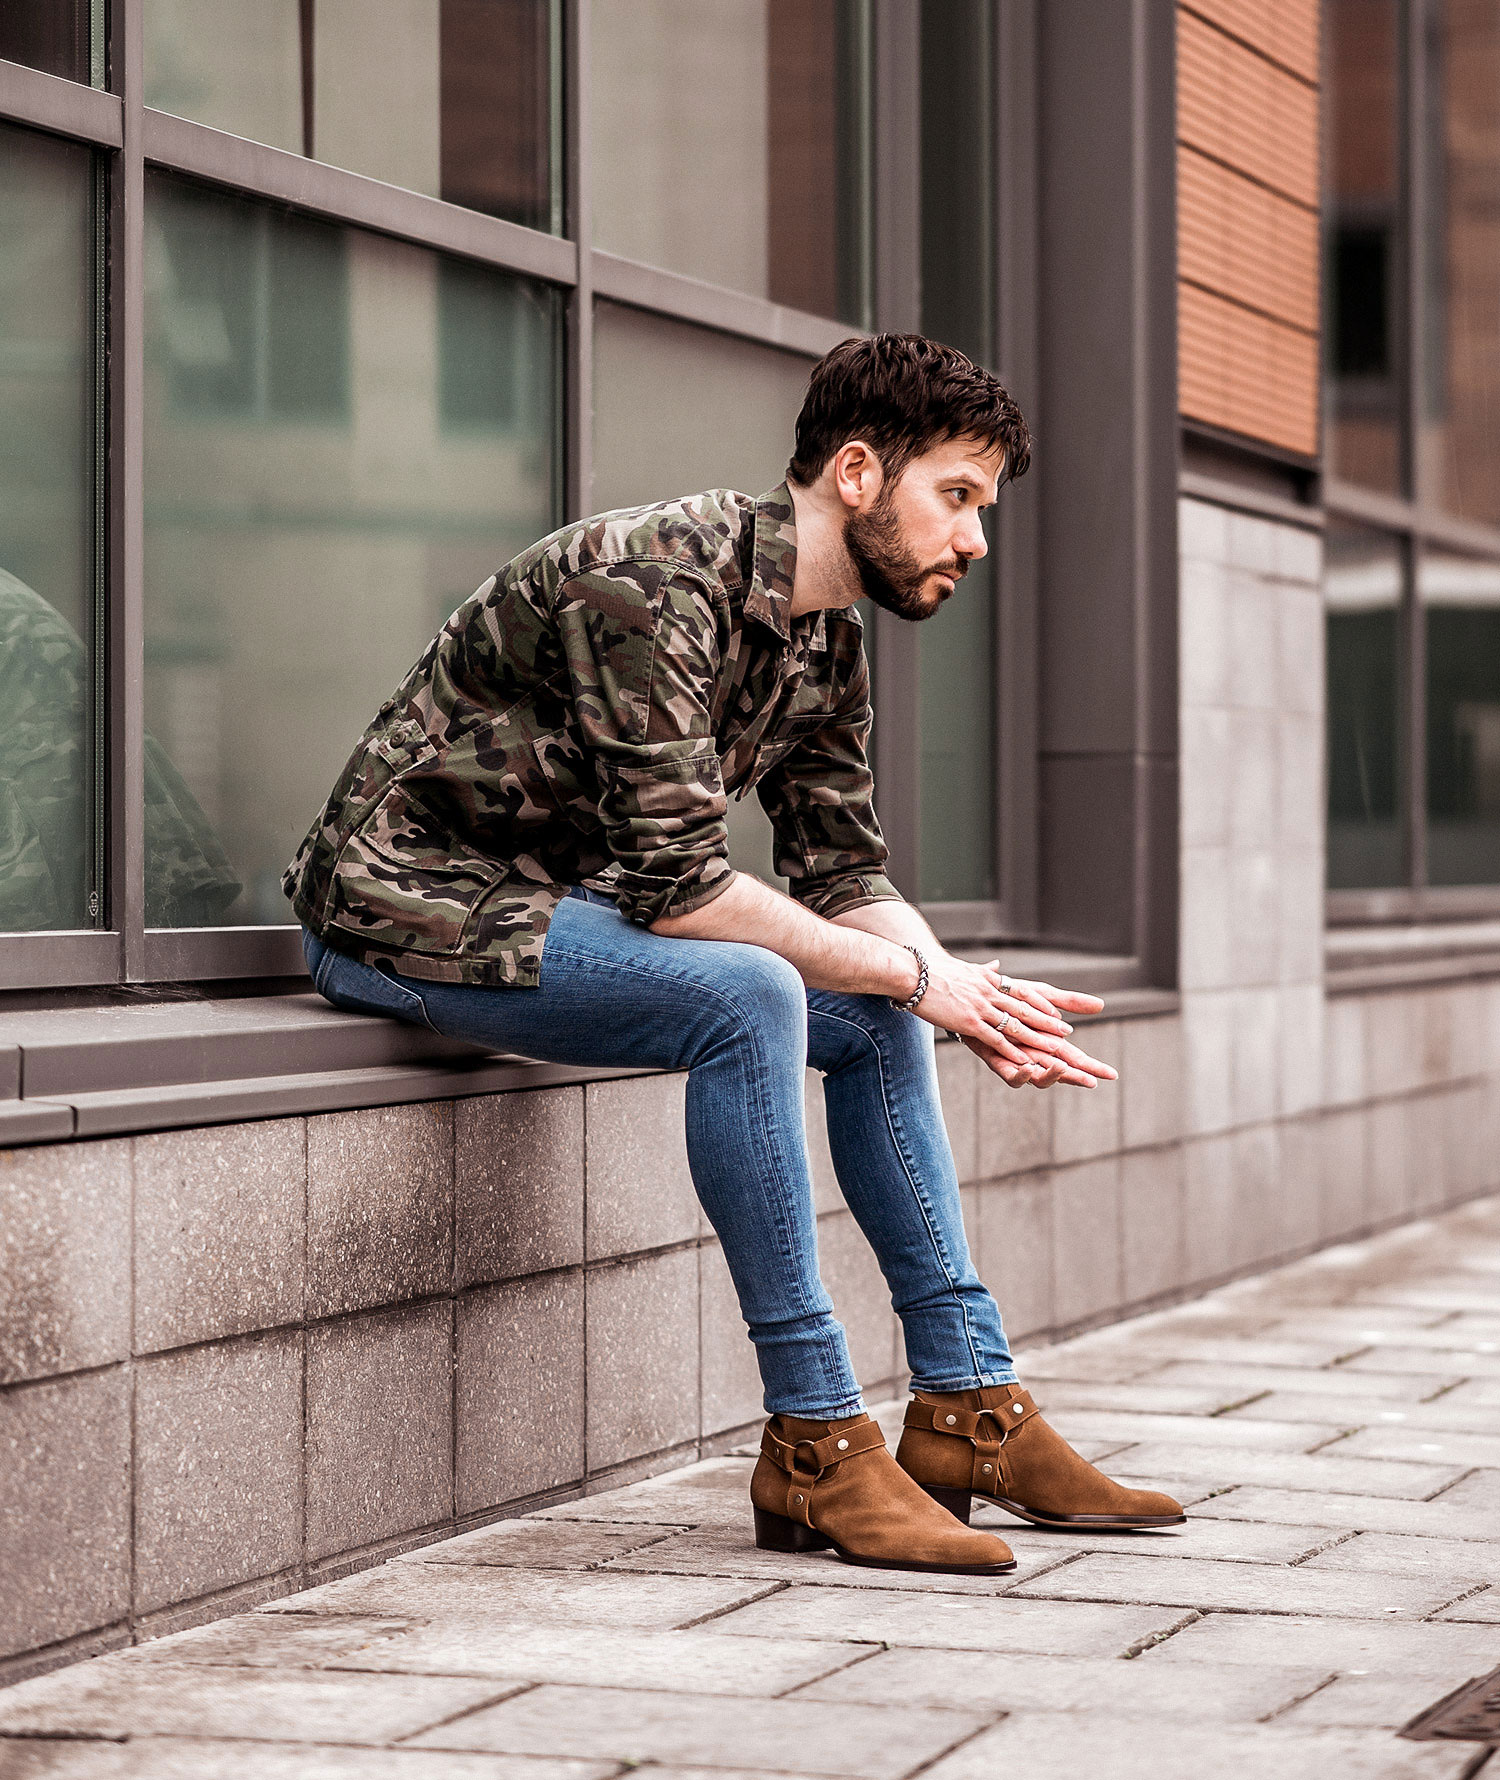 How To Wear A Camo Jacket For Men - Your Average Guy